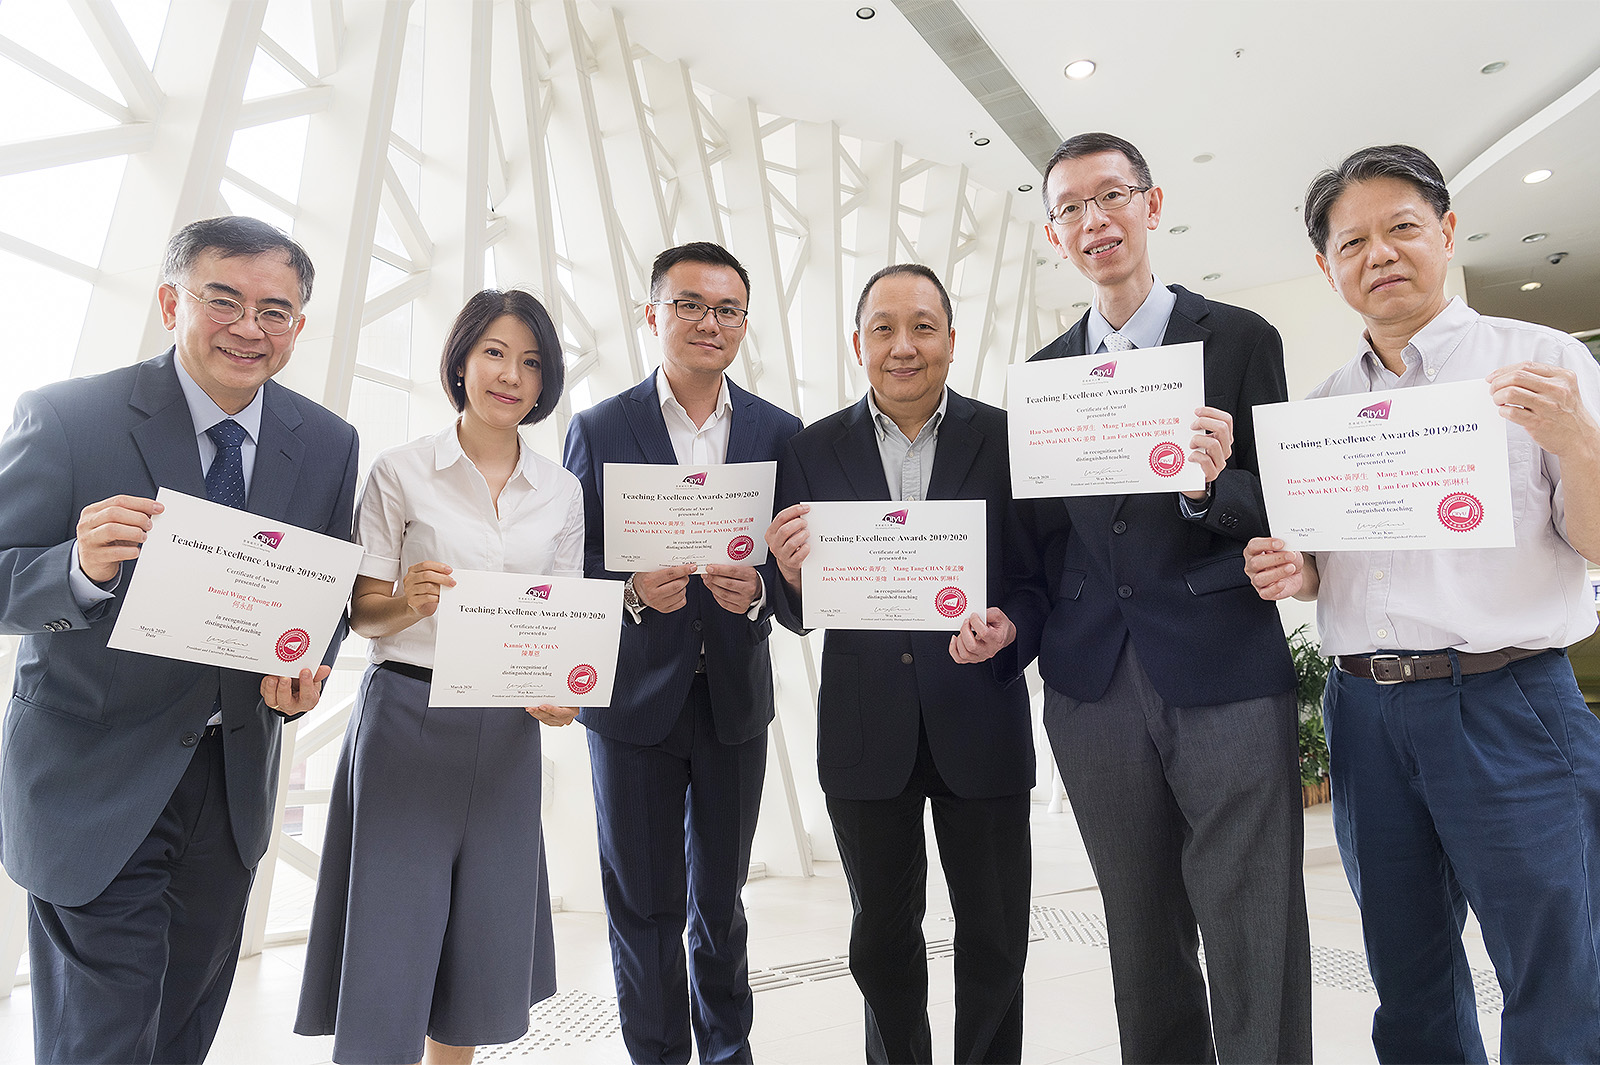 TEA winners at CityU (from left): Professor Daniel Ho Wing-cheong, Dr Kannie Chan Wai-yan, and the IT Professional Placement Team comprising Dr Jacky Keung Wai, Dr Chan Mang-tang, Dr Raymond Wong Hau-san and Dr Kwok Lam-for.